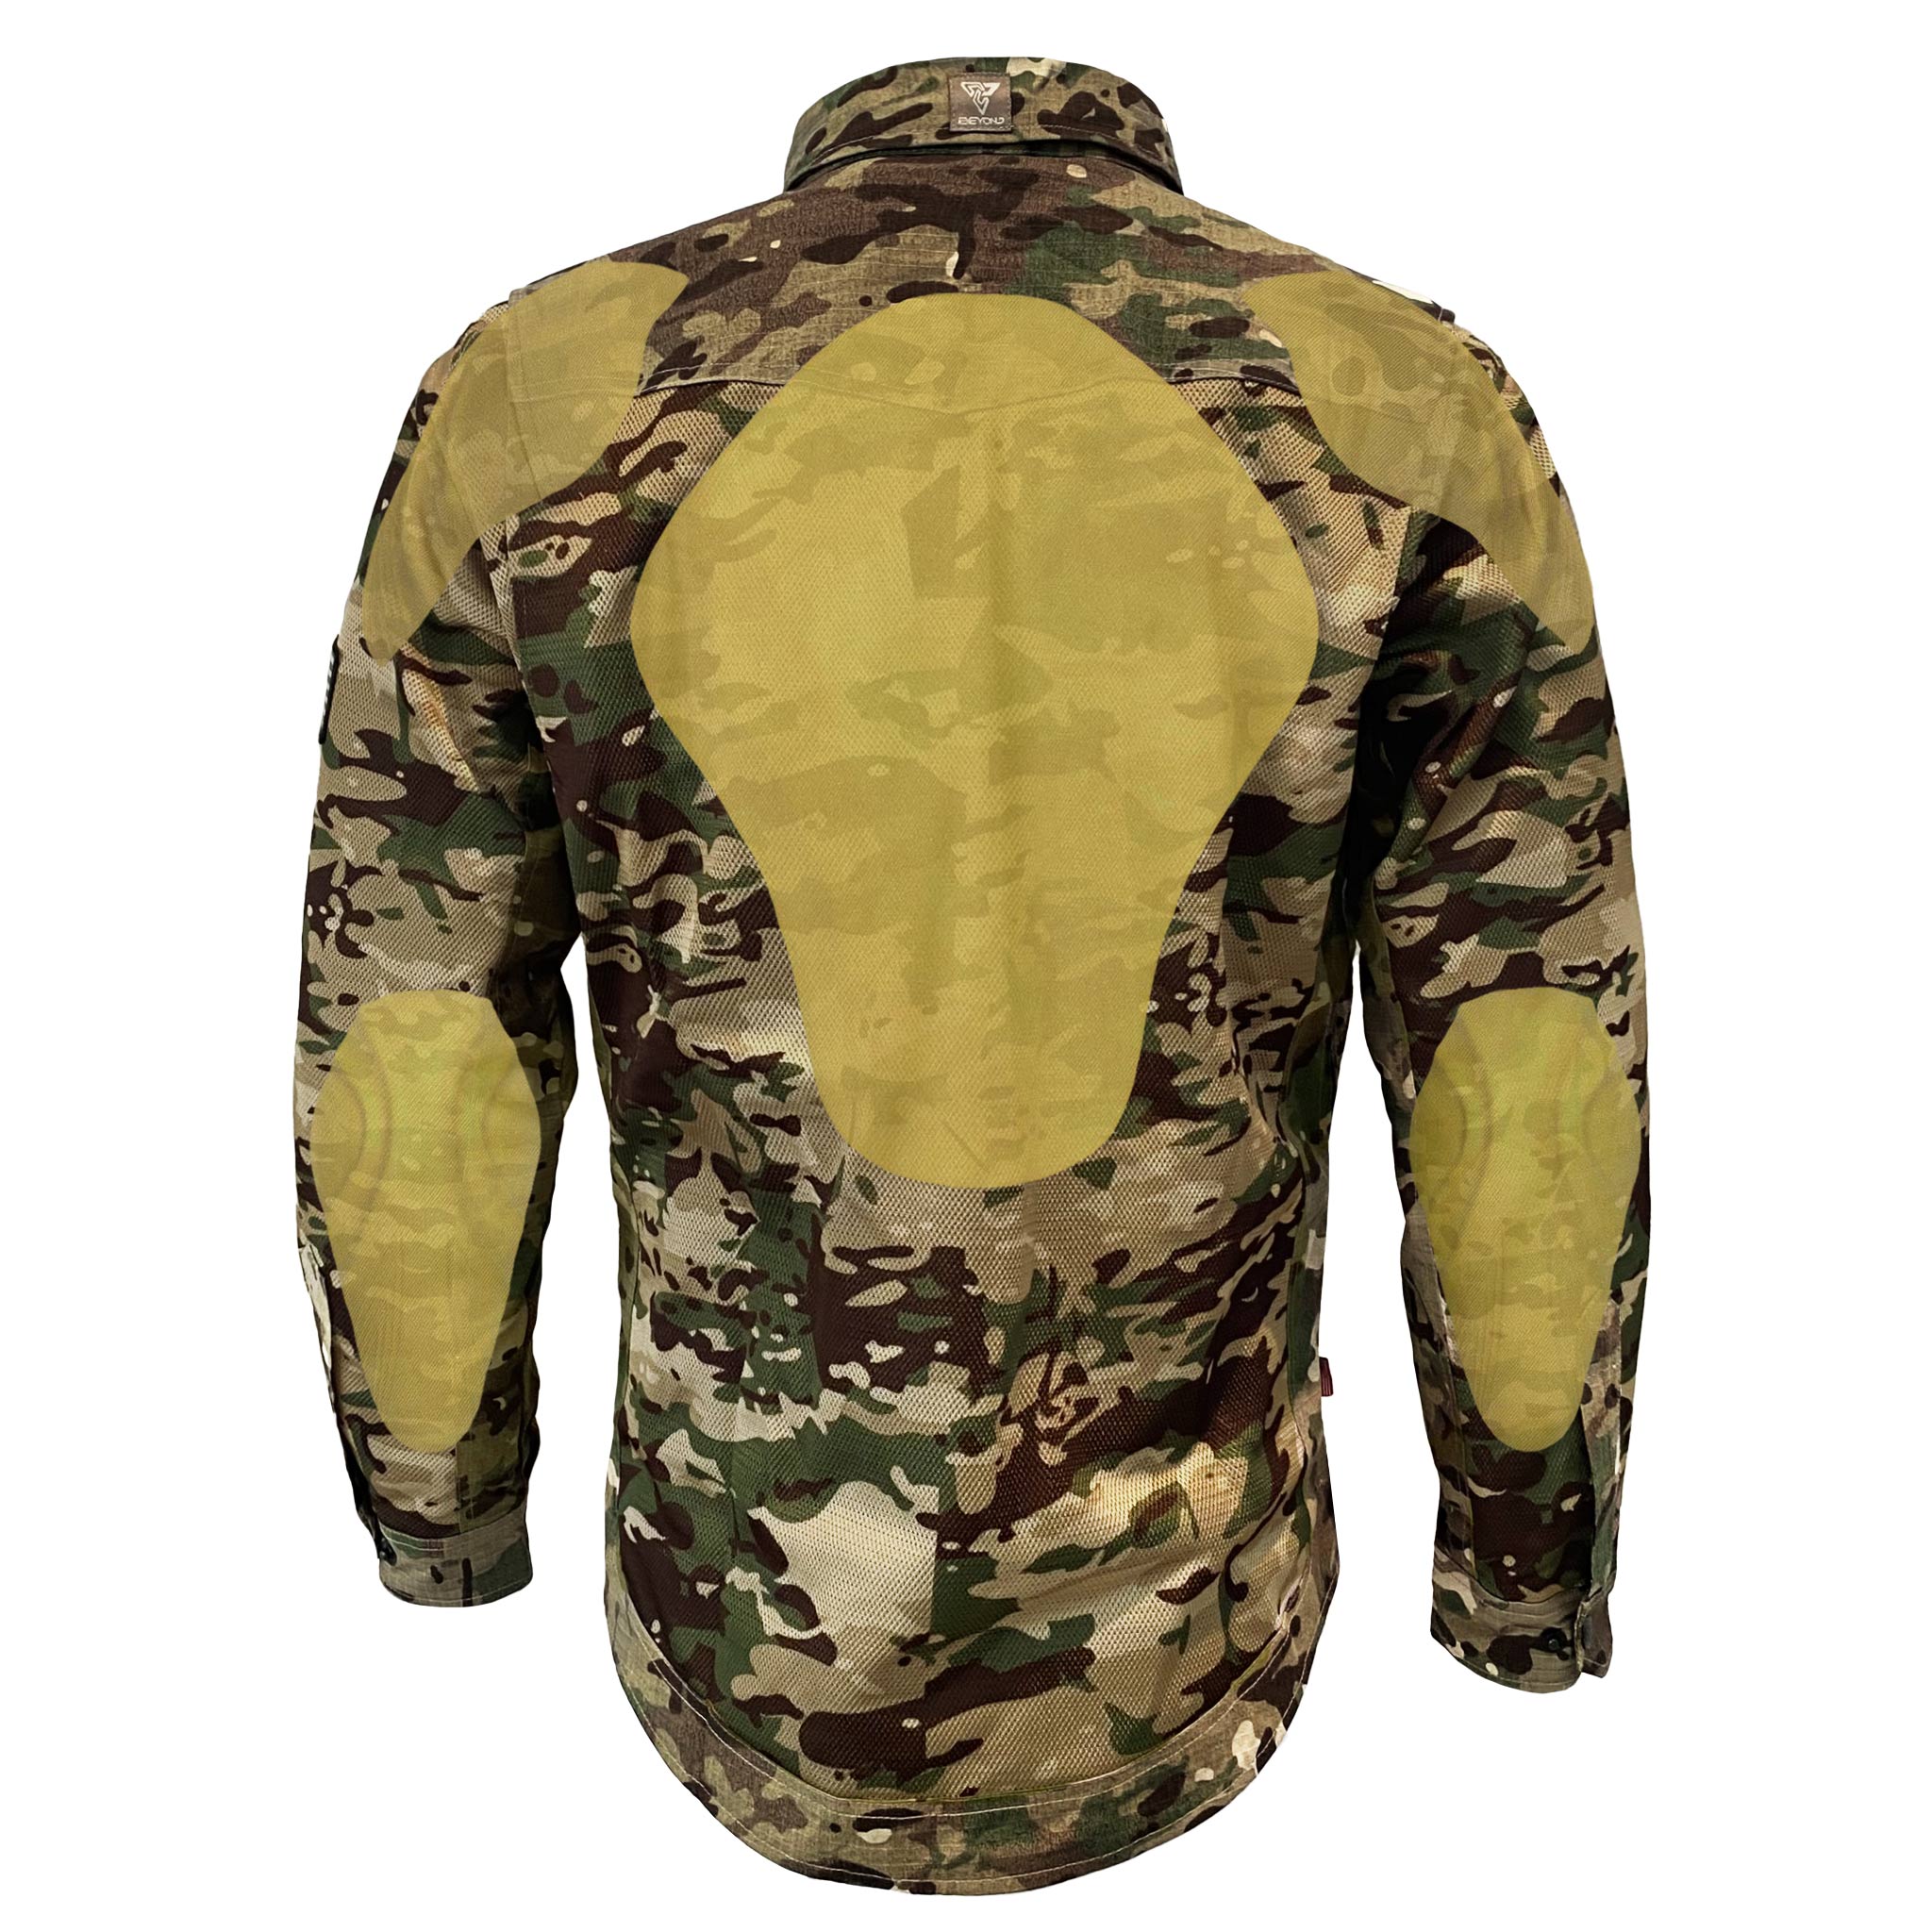 Summer Mesh Protective Camouflage Shirt "Delta Four" - Light Camouflage with Pads